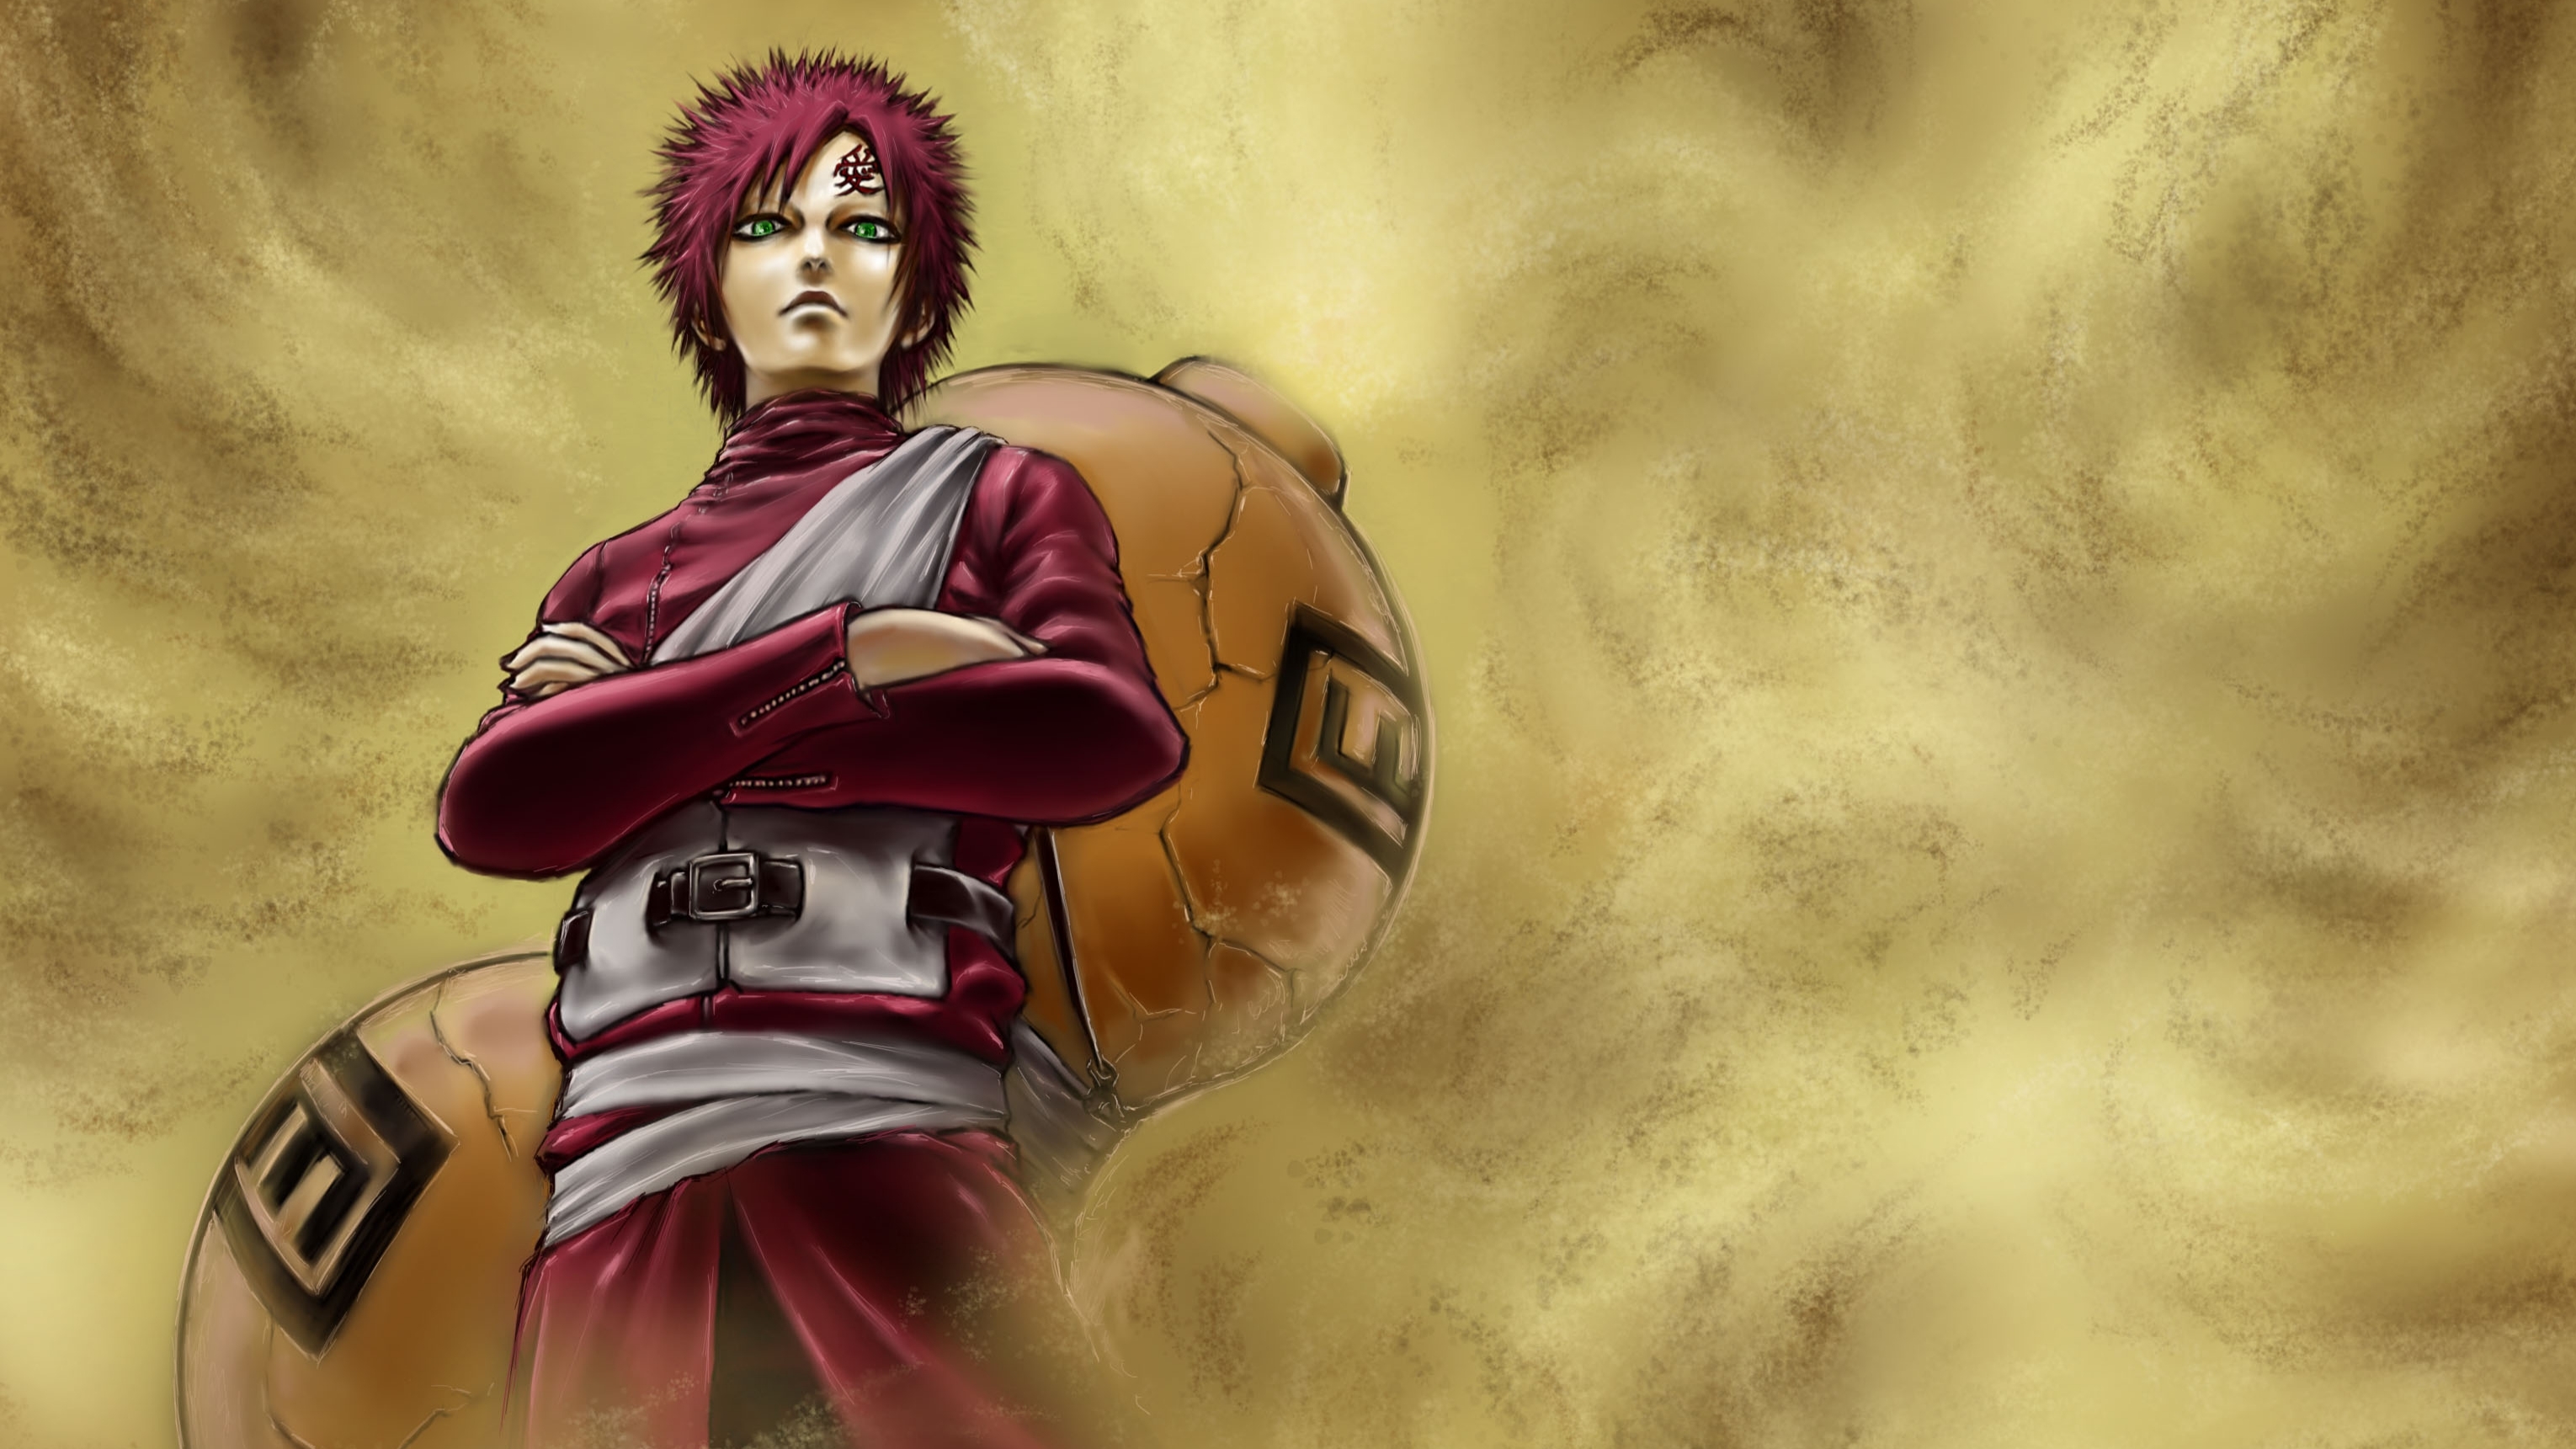 Gaara In Naruto Wallpaper Hd Anime 4k Wallpapers Images Photos And Background